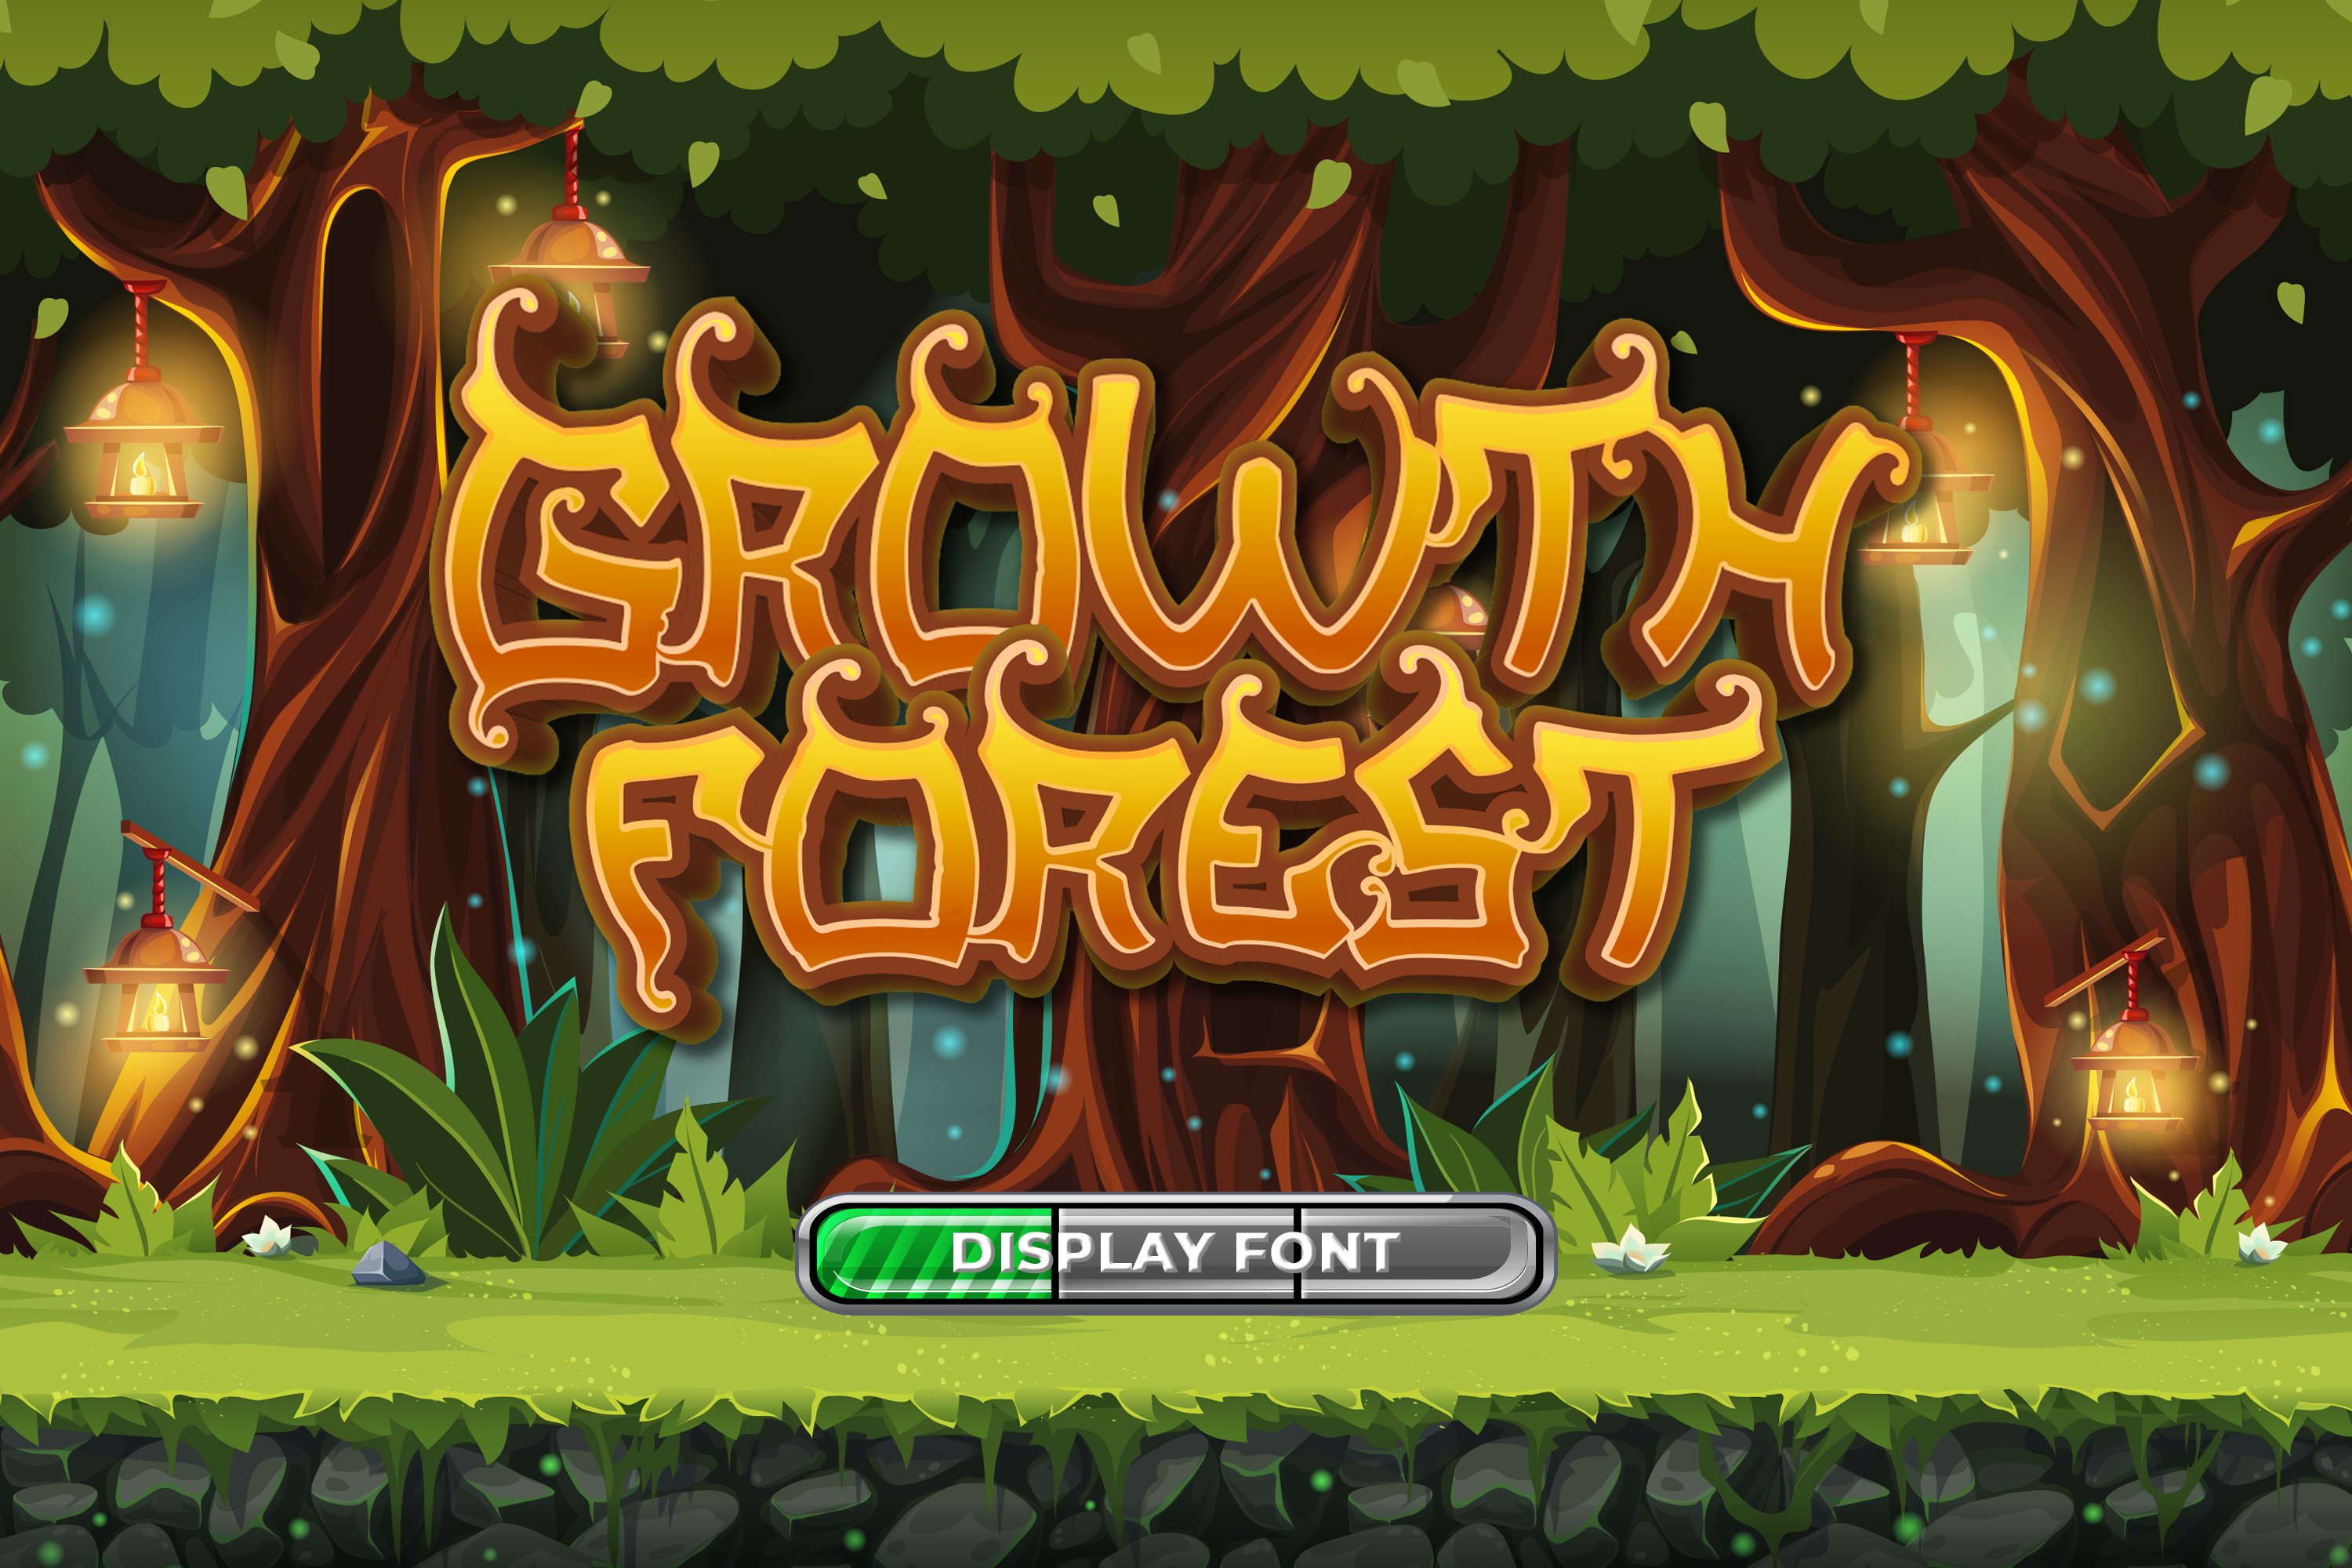 Growth Forest Adventure Display Font cover image.